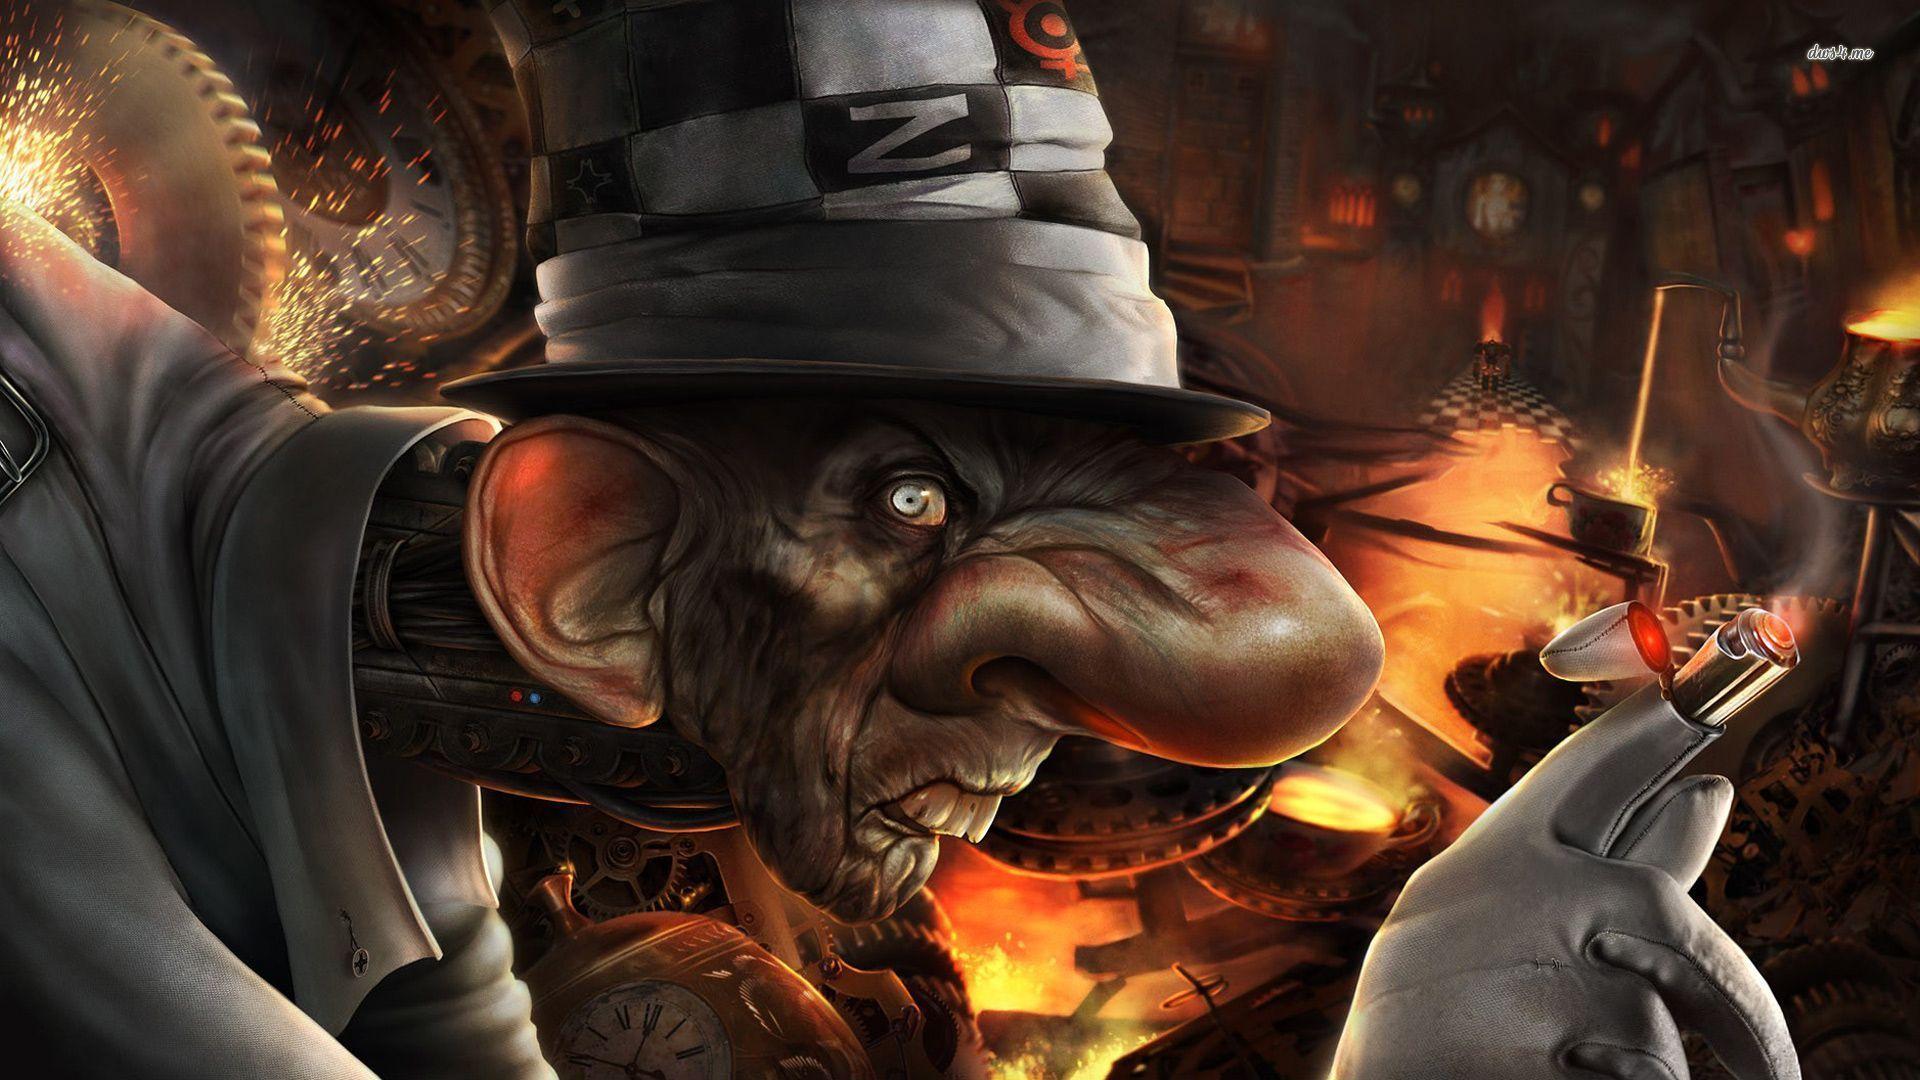 Alice: Madness Returns wallpaper - The Mad Hatter - Inmates run